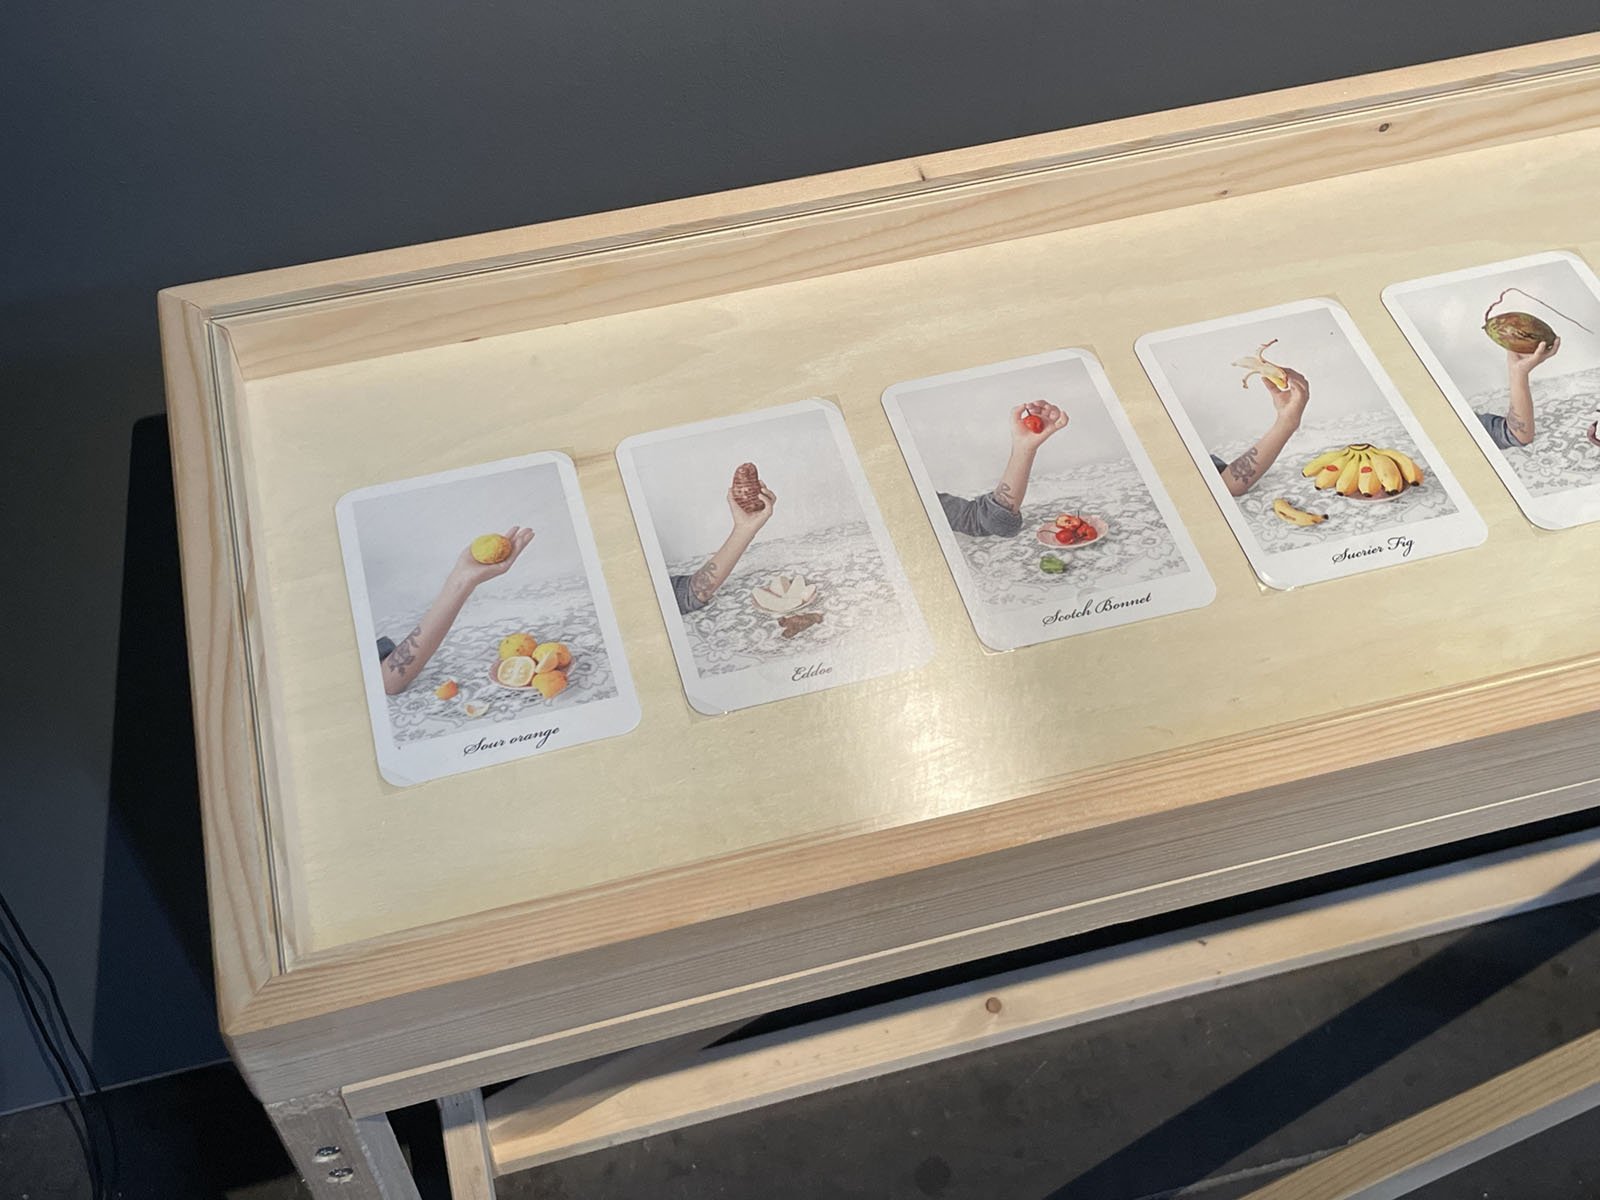   Flashcards, 2018-ongoing    20 4x6 inch cards, accompanied by  a recording of my mother teaching me names of the fruits and vegetables shown, while I repeat her words.    Shown in installation at Le Recontres d’Arles 2023  